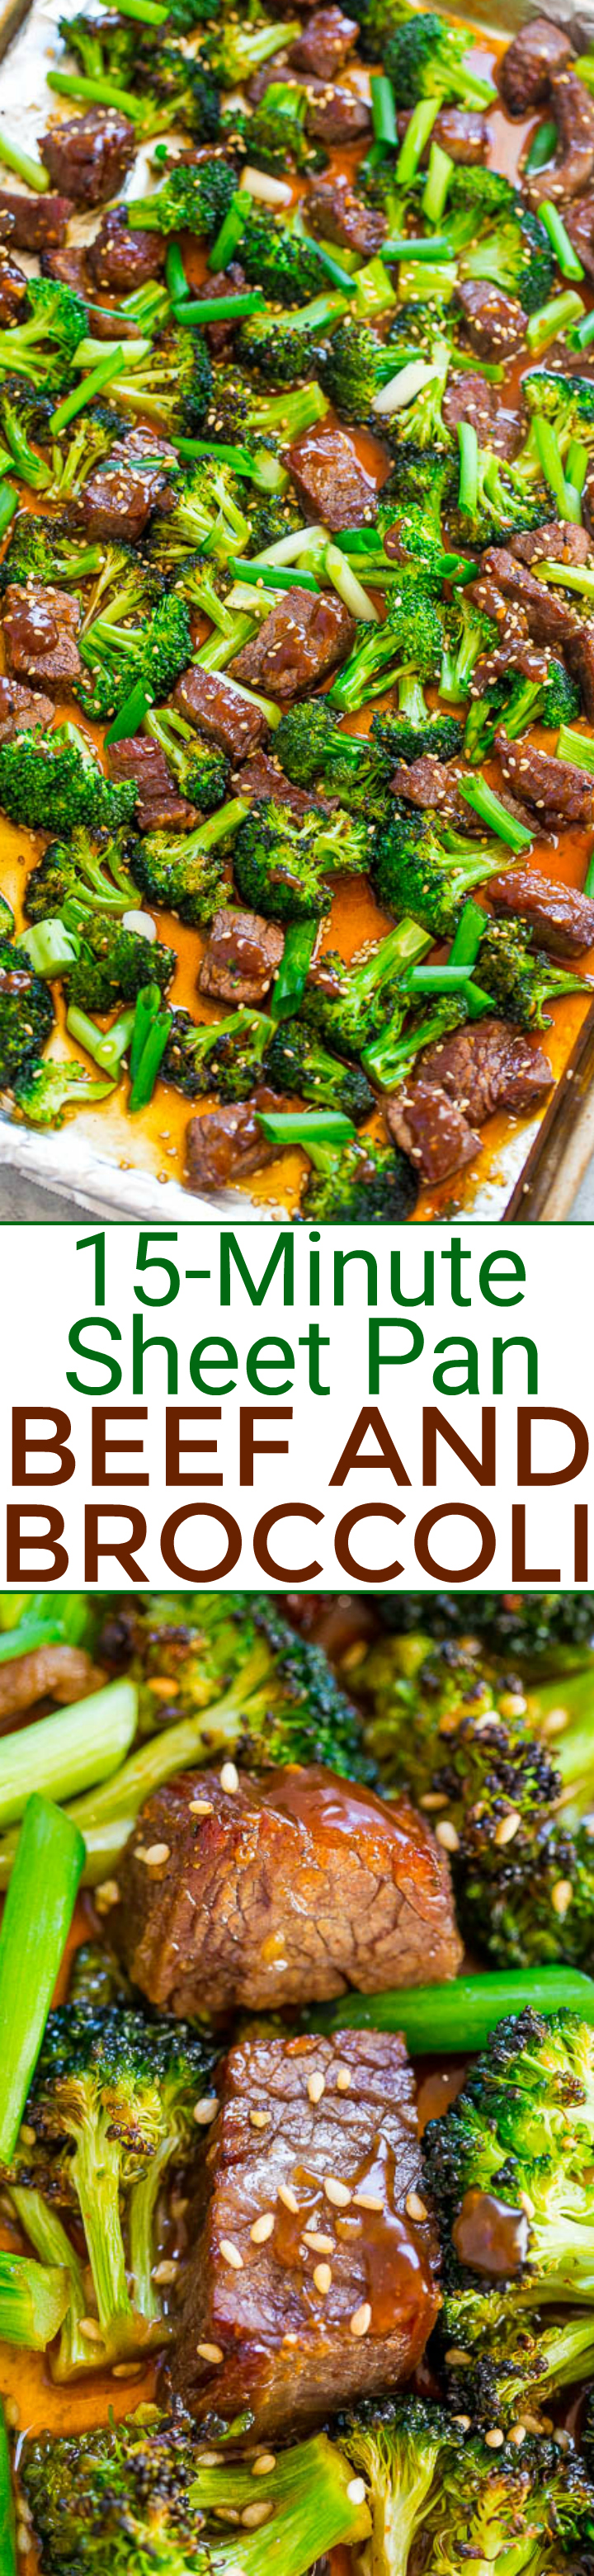 https://www.averiecooks.com/wp-content/uploads/2018/02/beefbroccolicollage.jpg